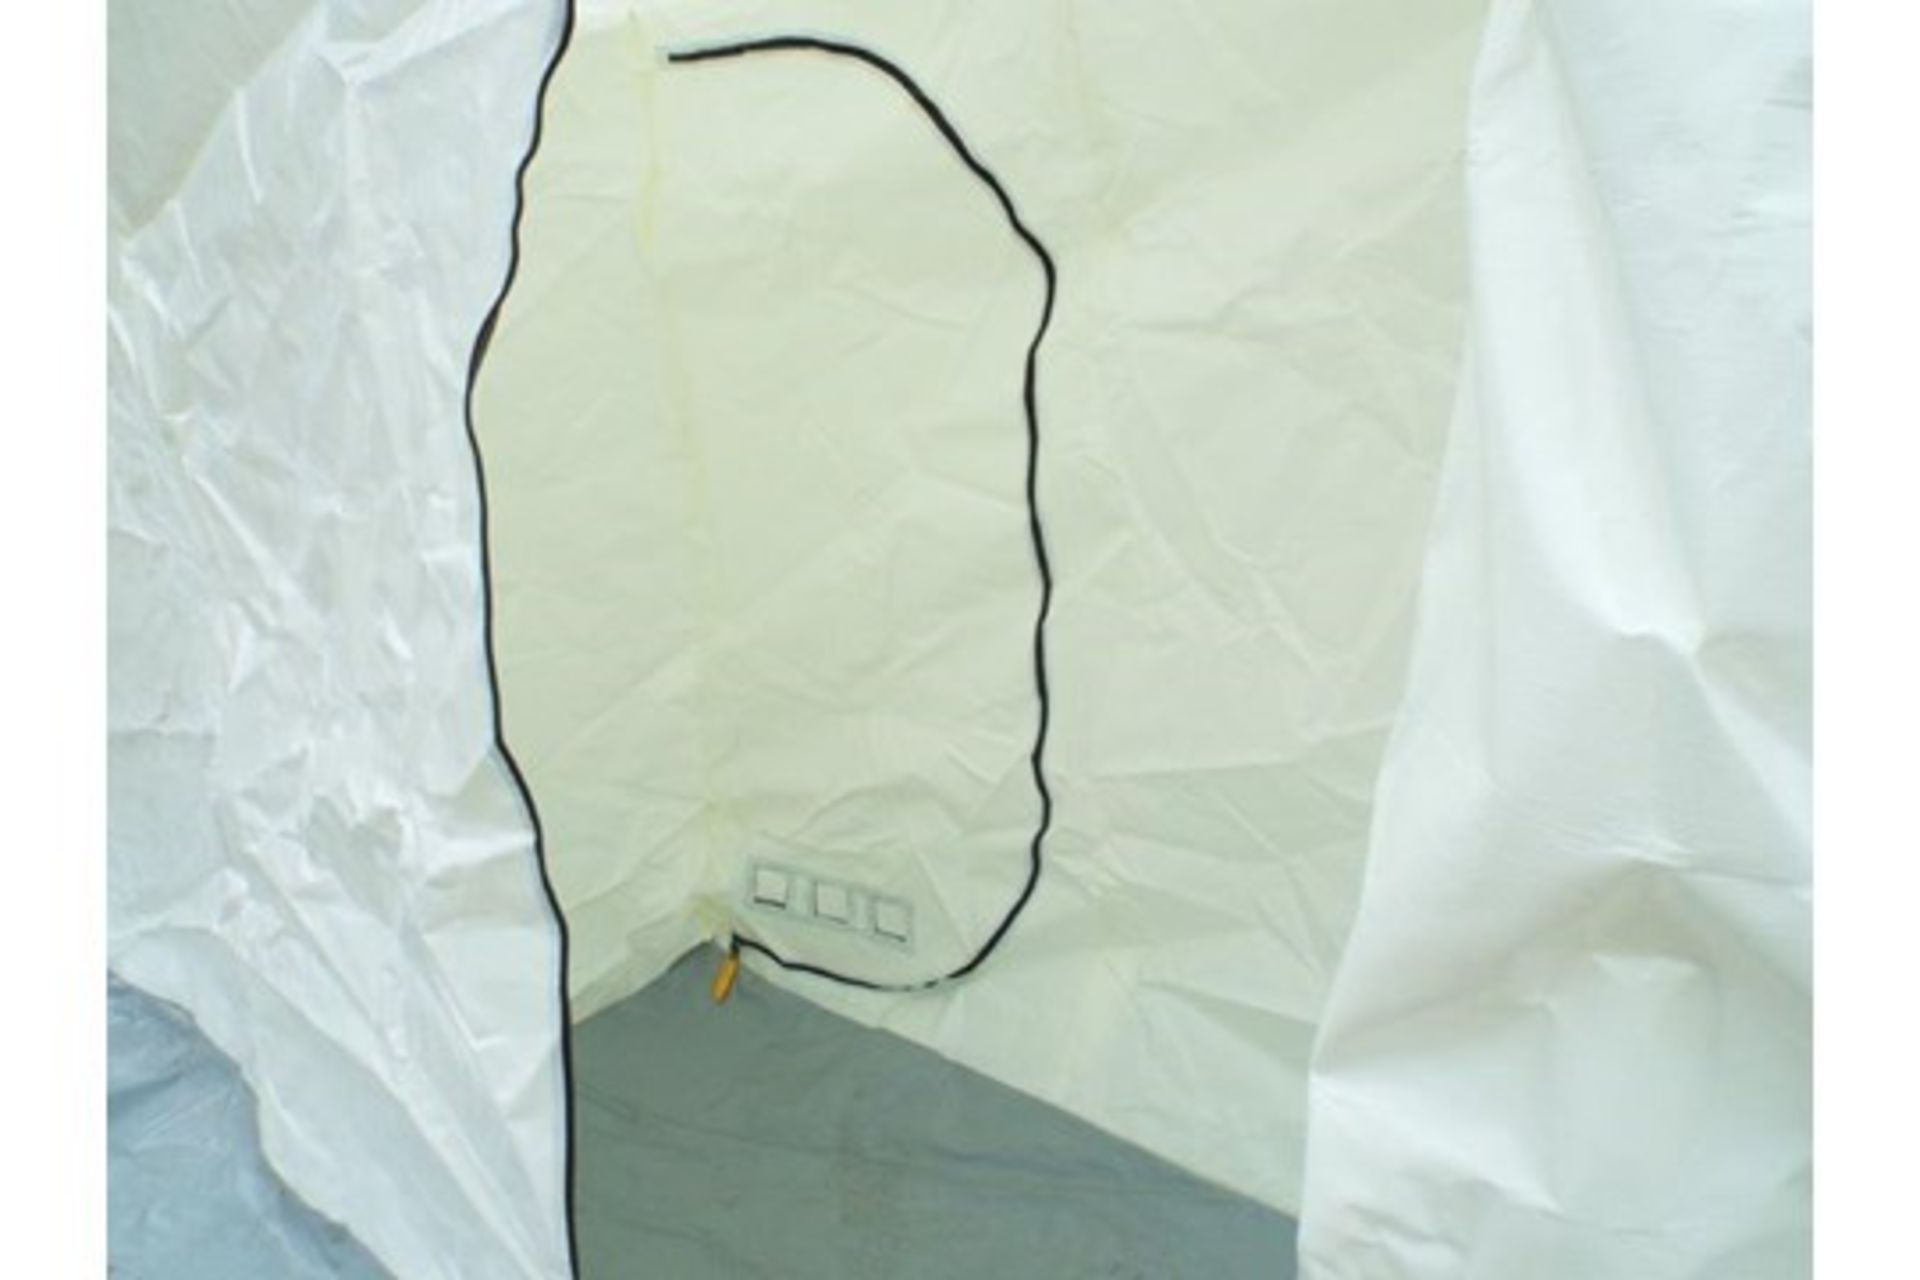 Unissued 8mx4m Inflatable Decontamination/Party Tent - Image 10 of 14